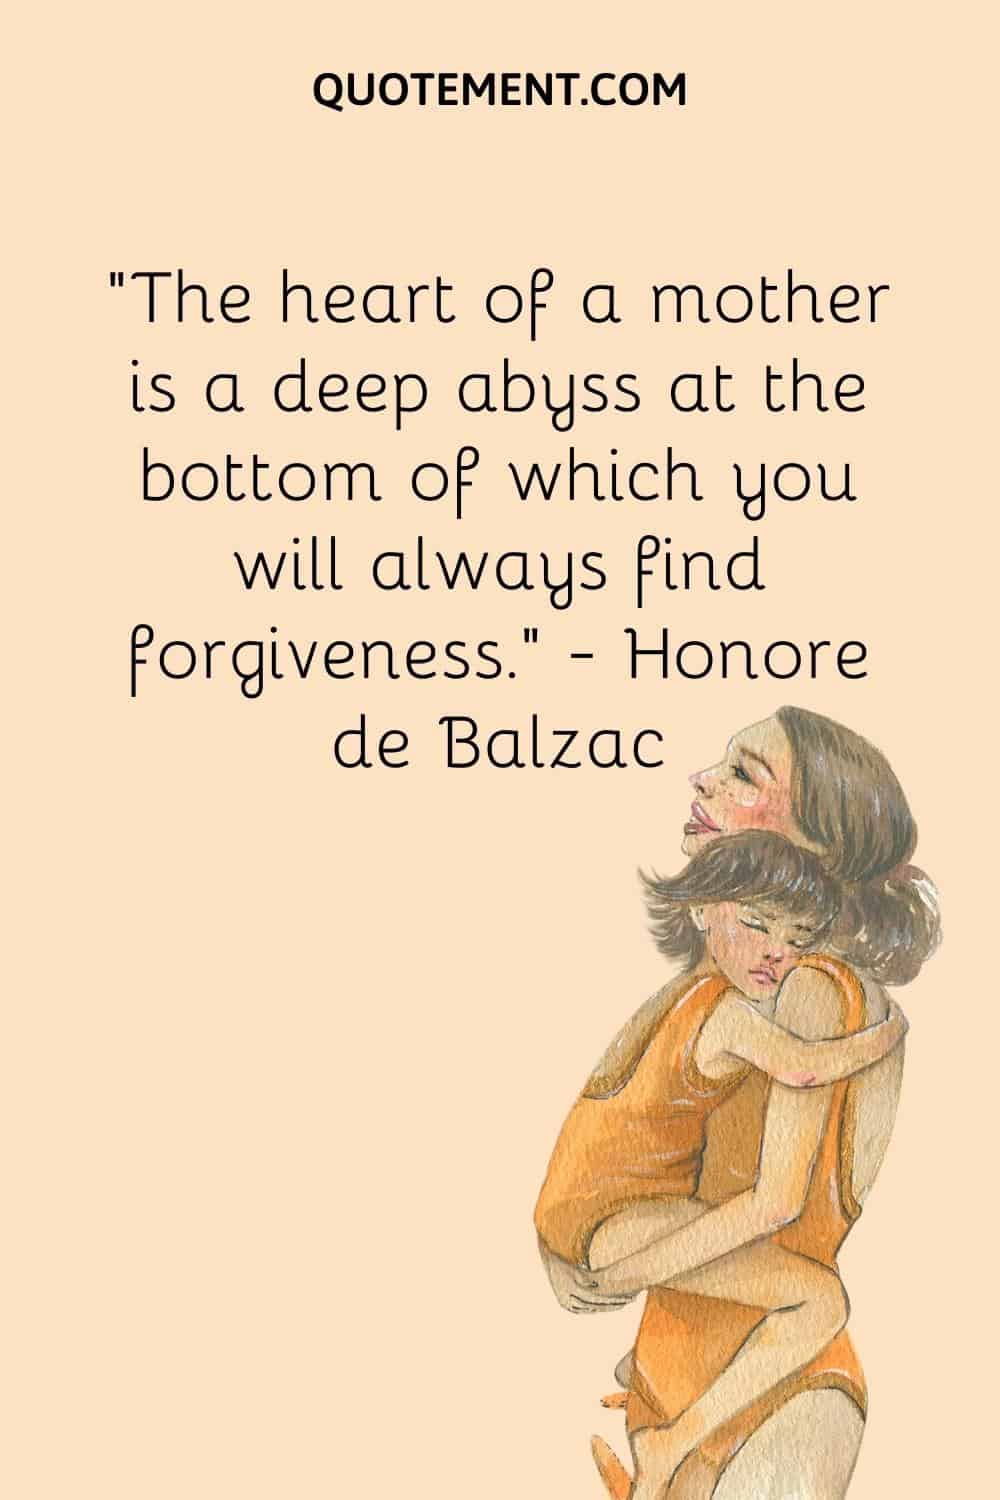 “The heart of a mother is a deep abyss at the bottom of which you will always find forgiveness.” — Honore de Balzac